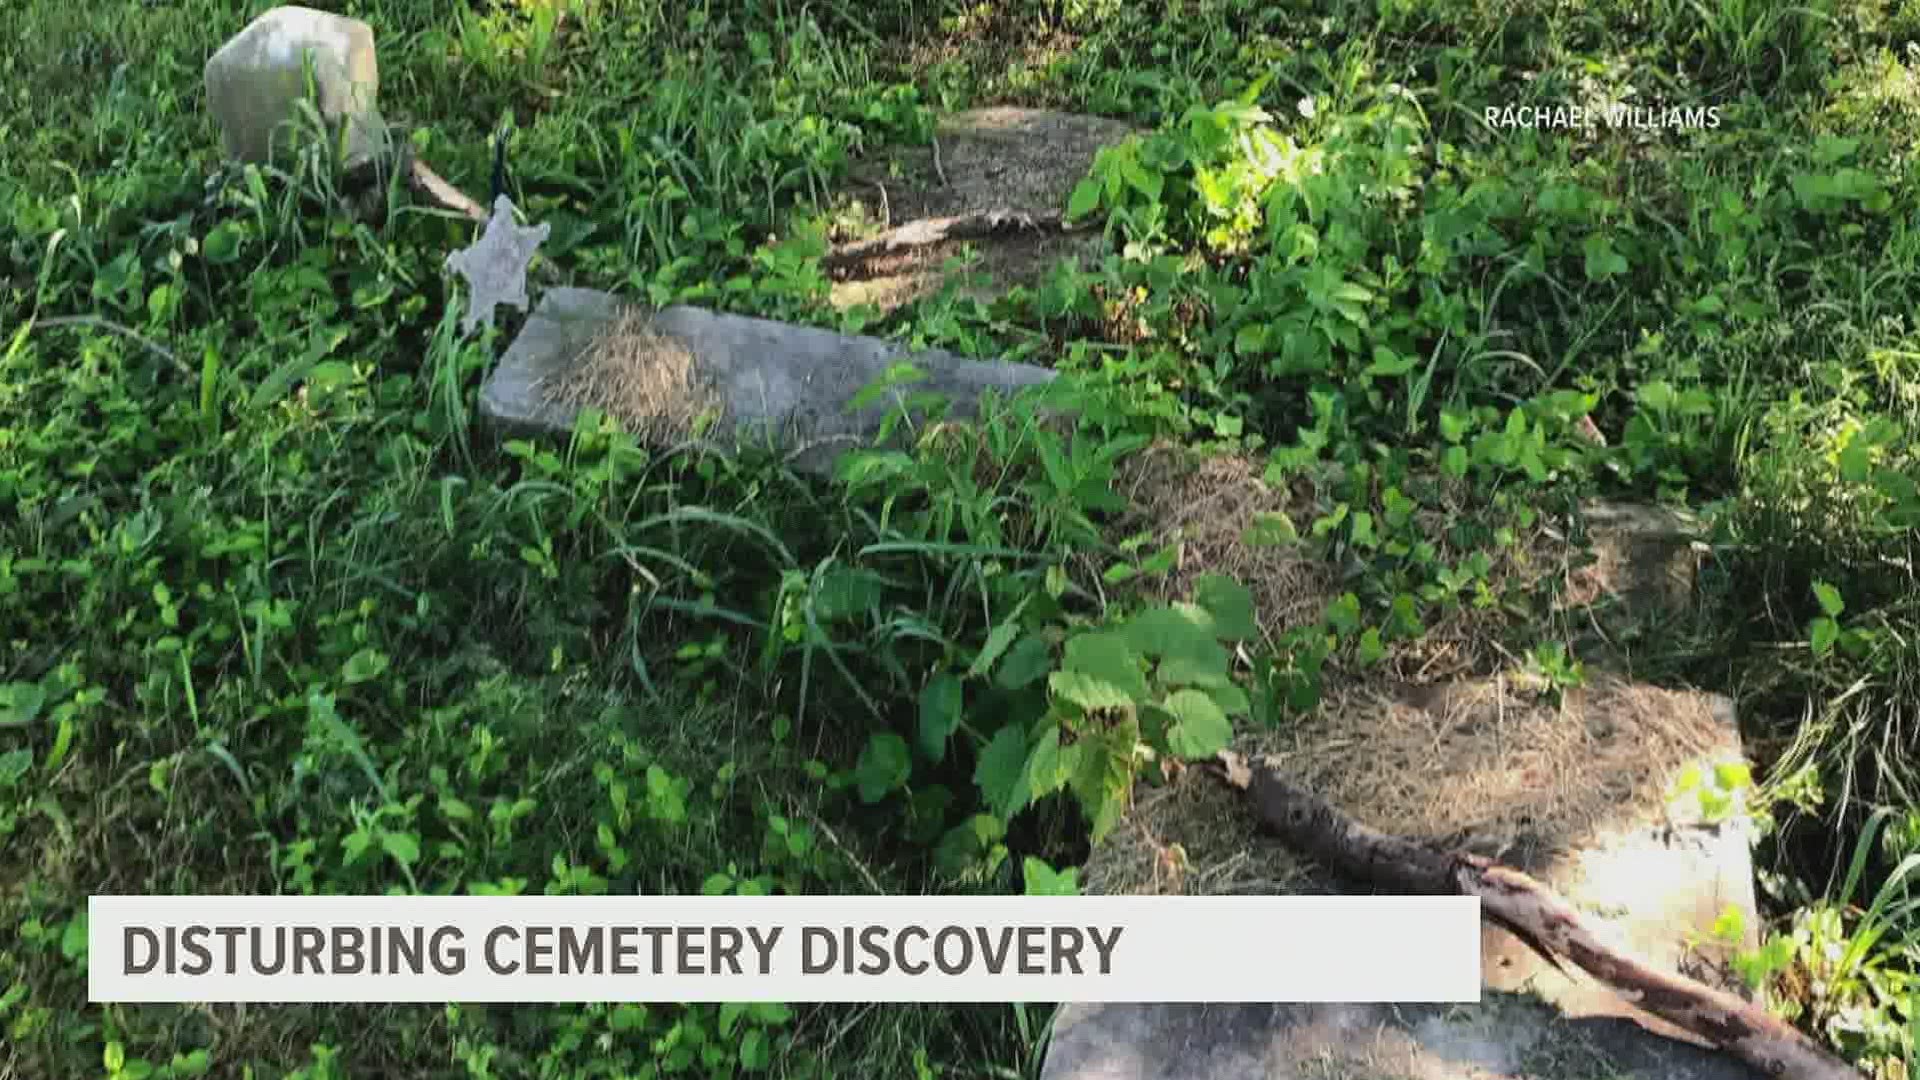 One woman visiting from New York, disturbed and and shocked at what she found at the historic Lincoln Cemetery in Dauphin County.